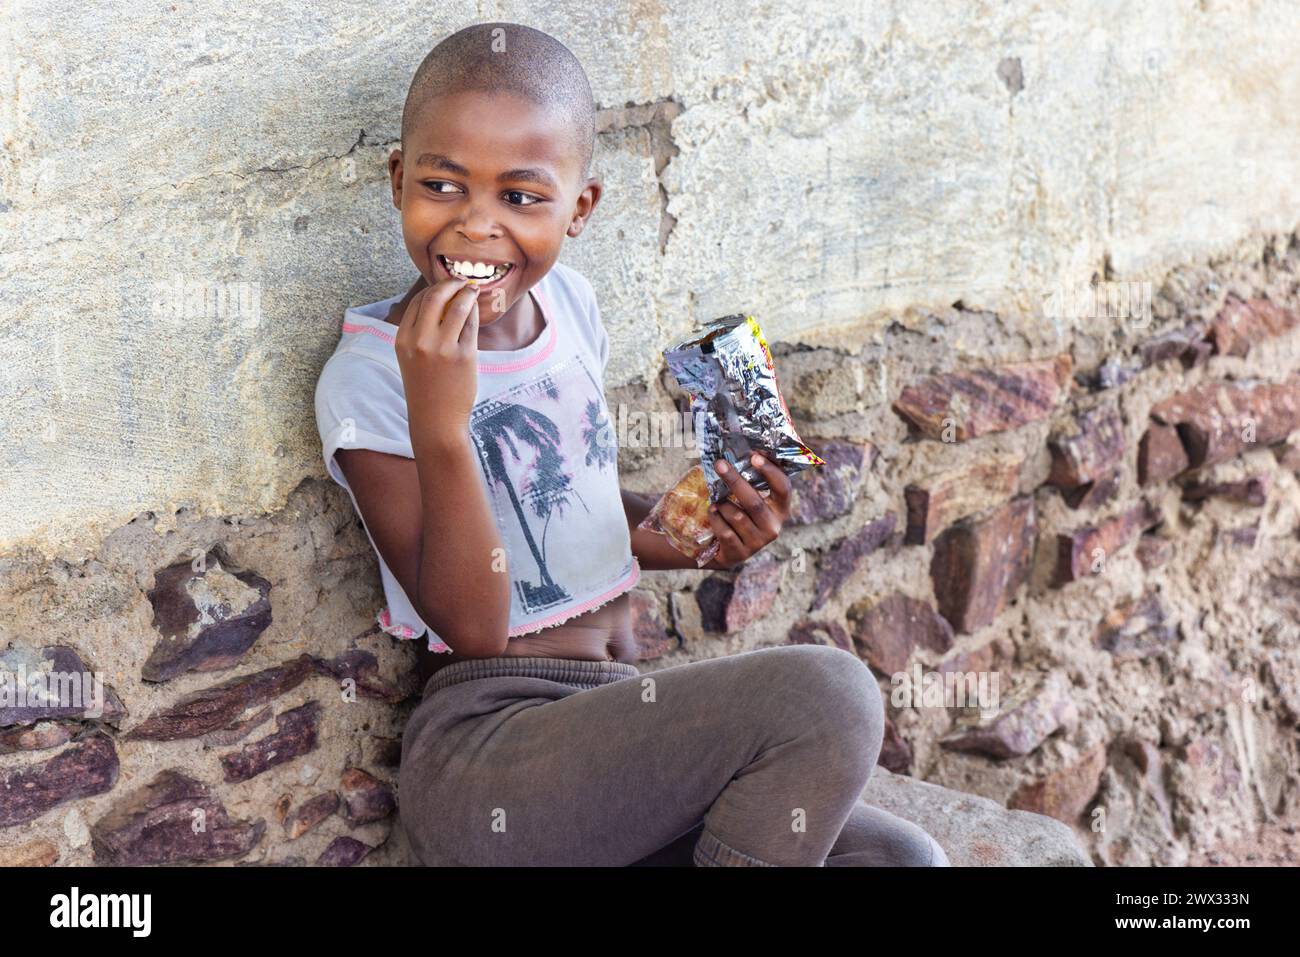 hungry single african girl with shaved head eating some snacks in front of the house in a village, Stock Photo